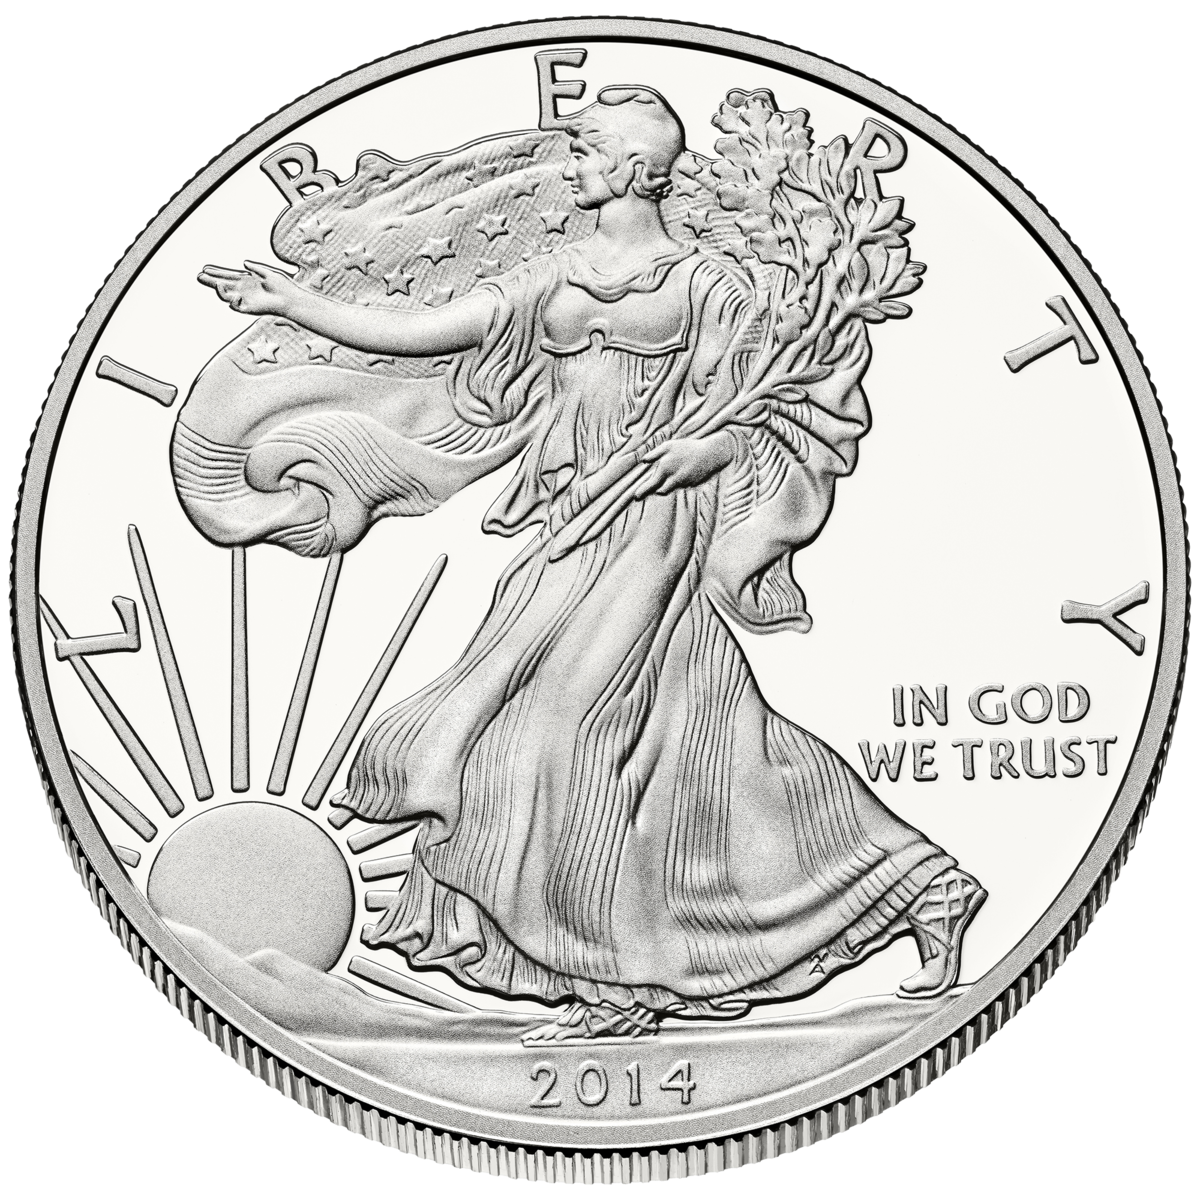 High-quality Silver American Eagle coin.